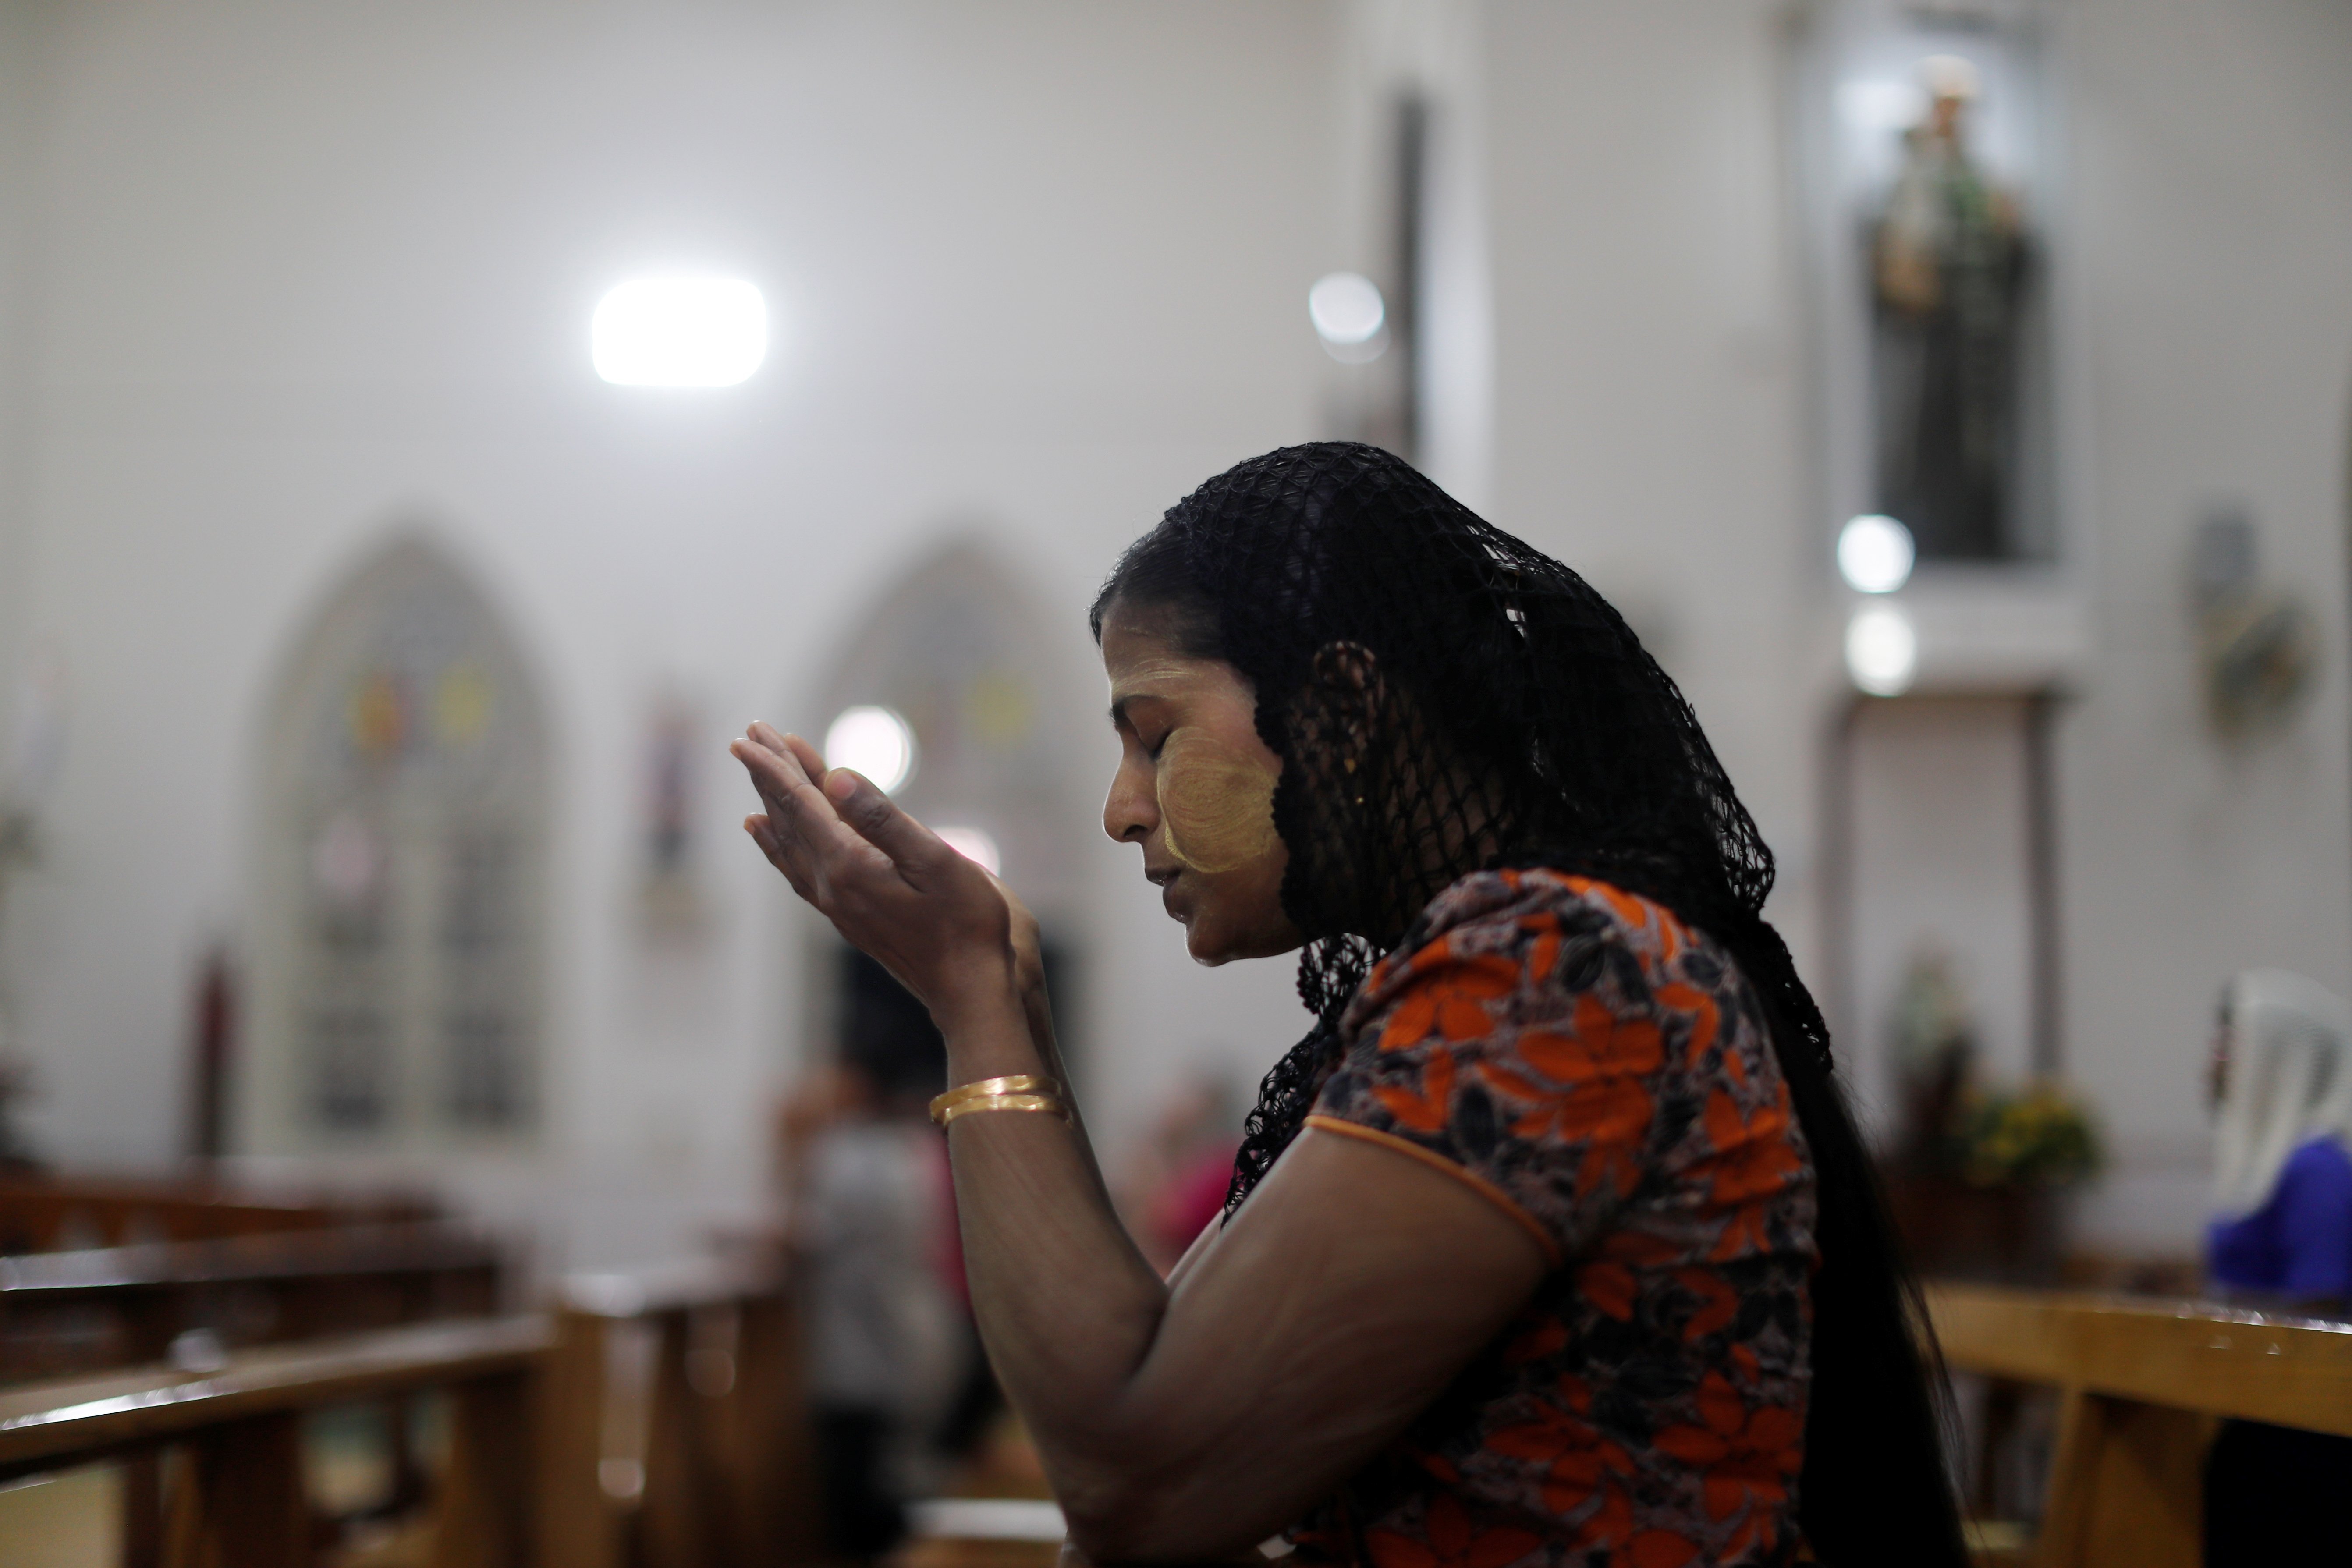 A woman is pictured in a file photo praying at St. Anthony Church in Yangon, Myanmar, Nov. 28, 2017. (CNS photo/Jorge Silva, Reuters)